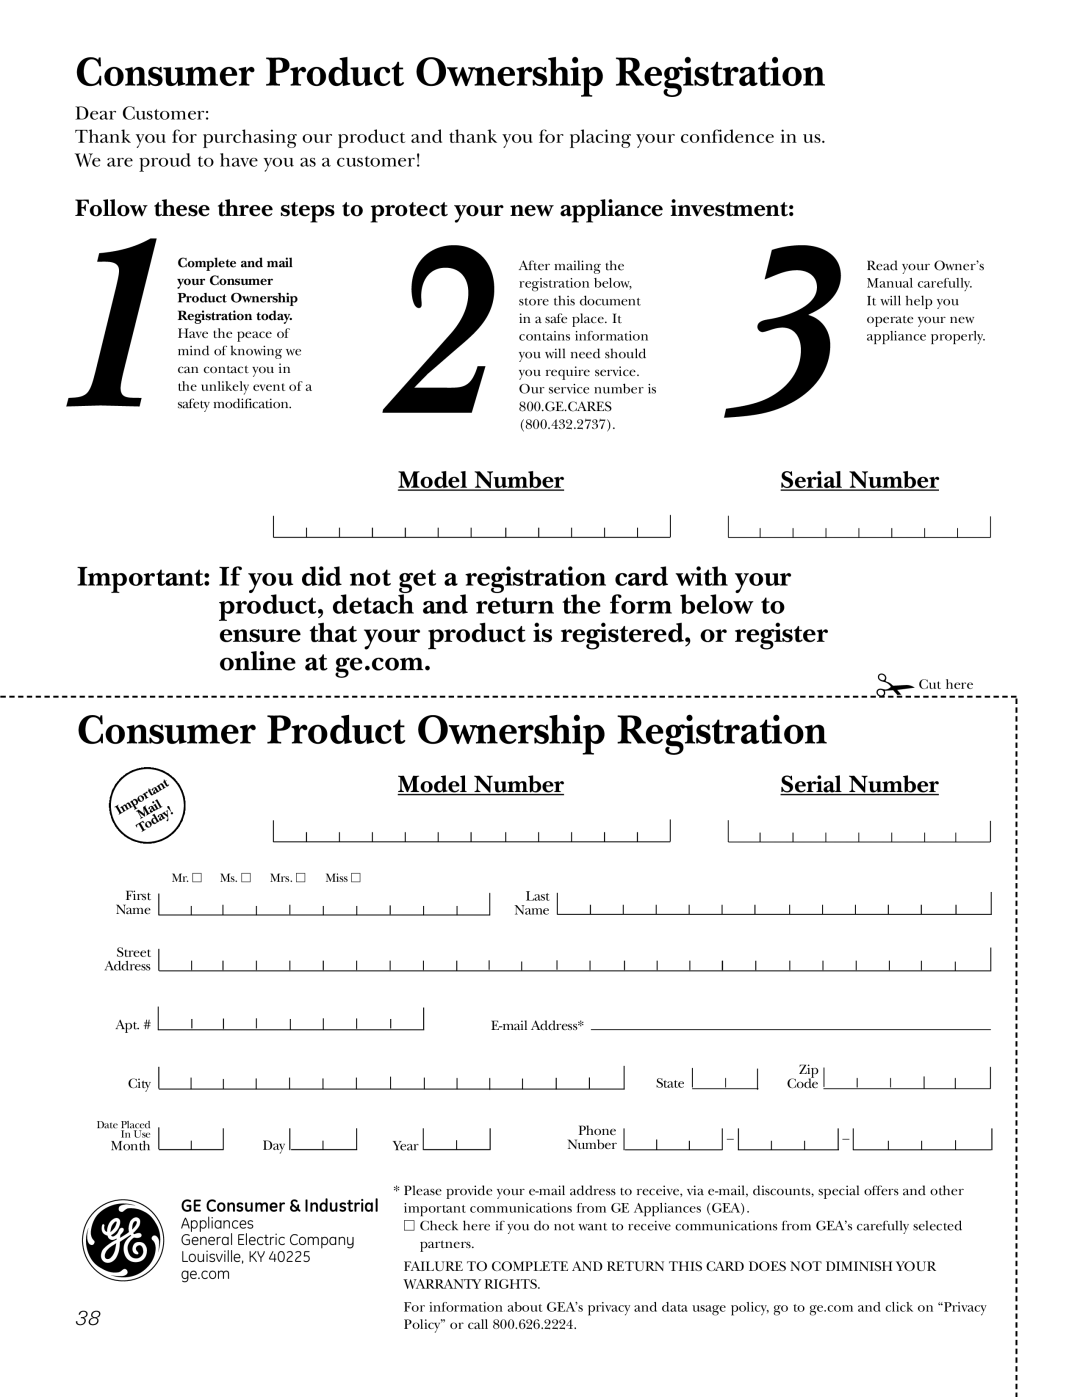 GE JGP990 Consumer Product Ownership Registration, Model Number, Serial Number, GE Consumer & Industrial, your Consumer 